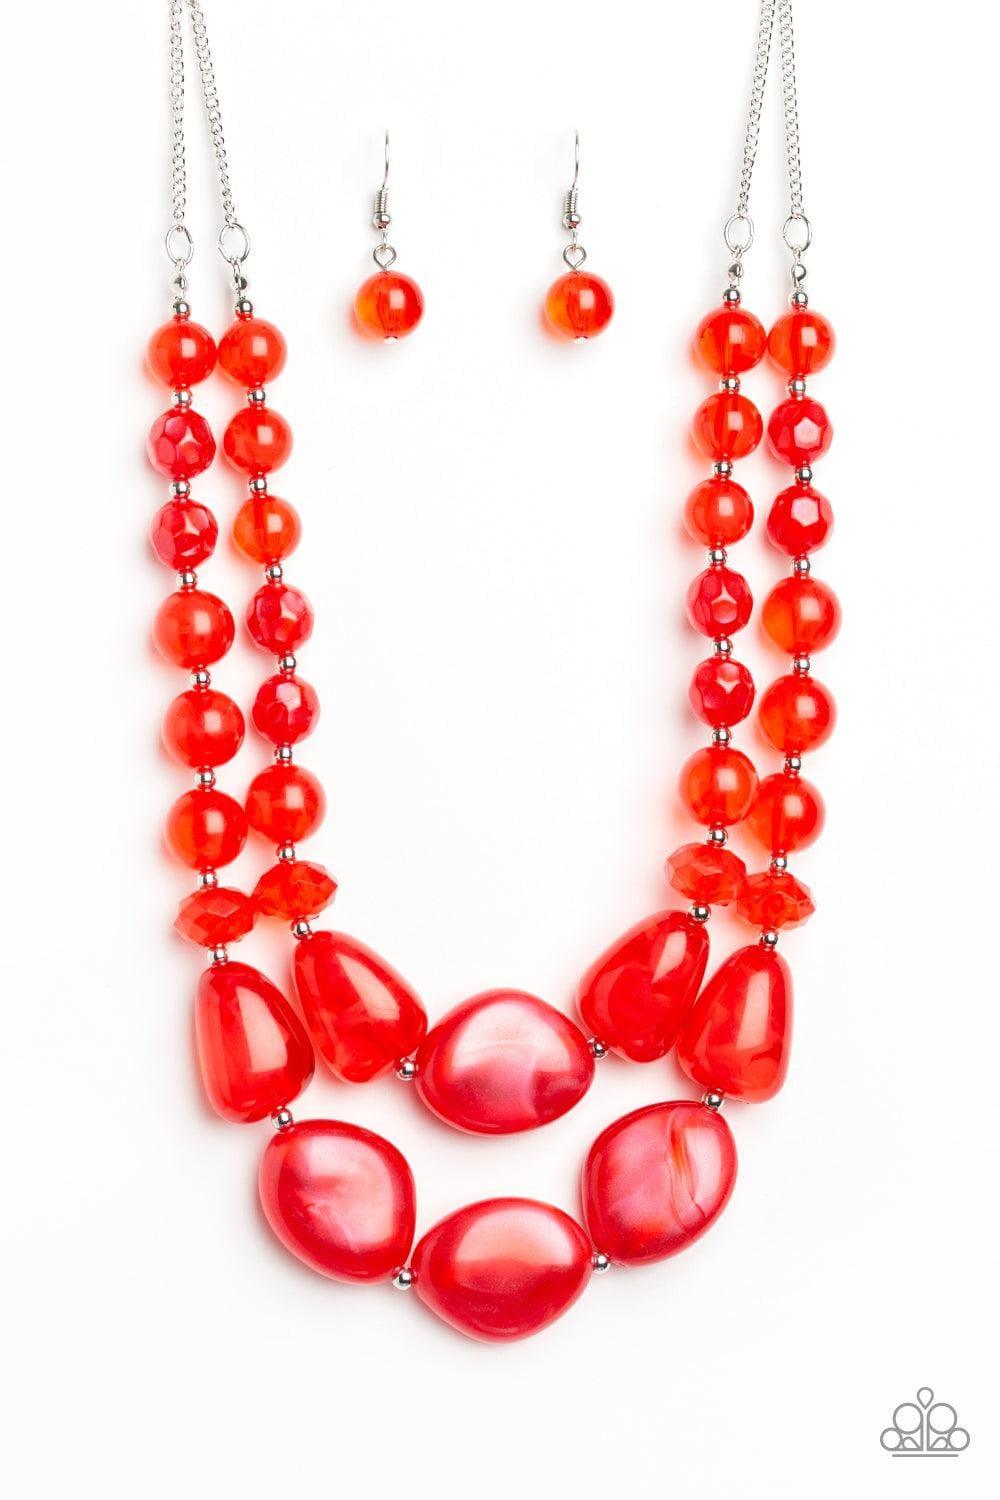 Paparazzi Accessories - Beach Glam - Red Necklace - Bling by JessieK